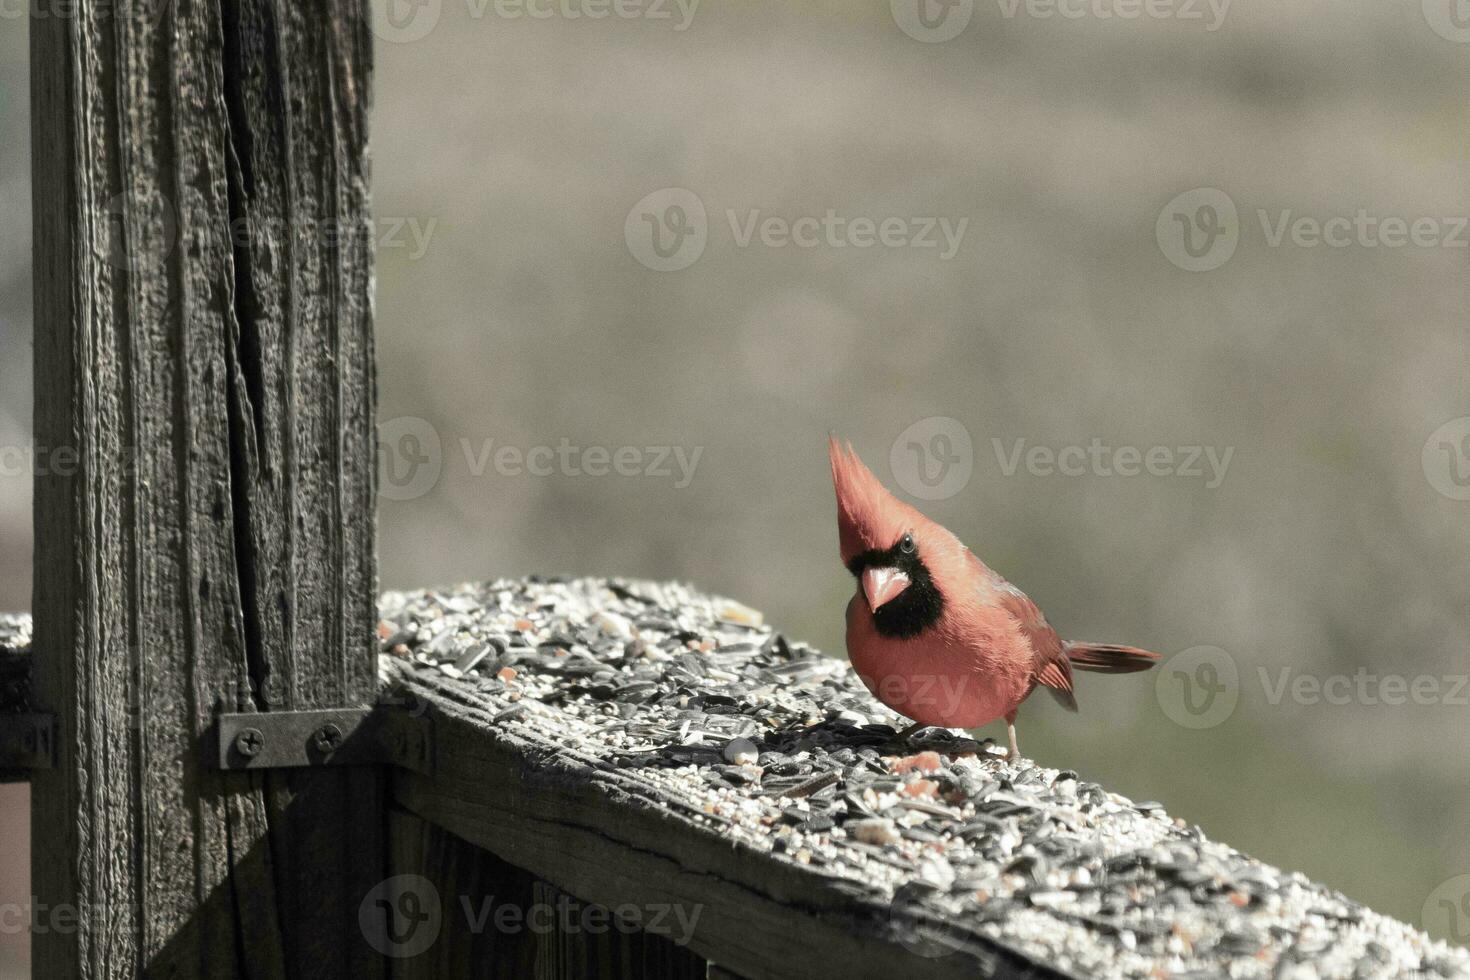 This beautiful red cardinal came out to the brown wooden railing of the deck for food. His beautiful mohawk standing straight up with his black mask. This little avian is surrounded by birdseed. photo